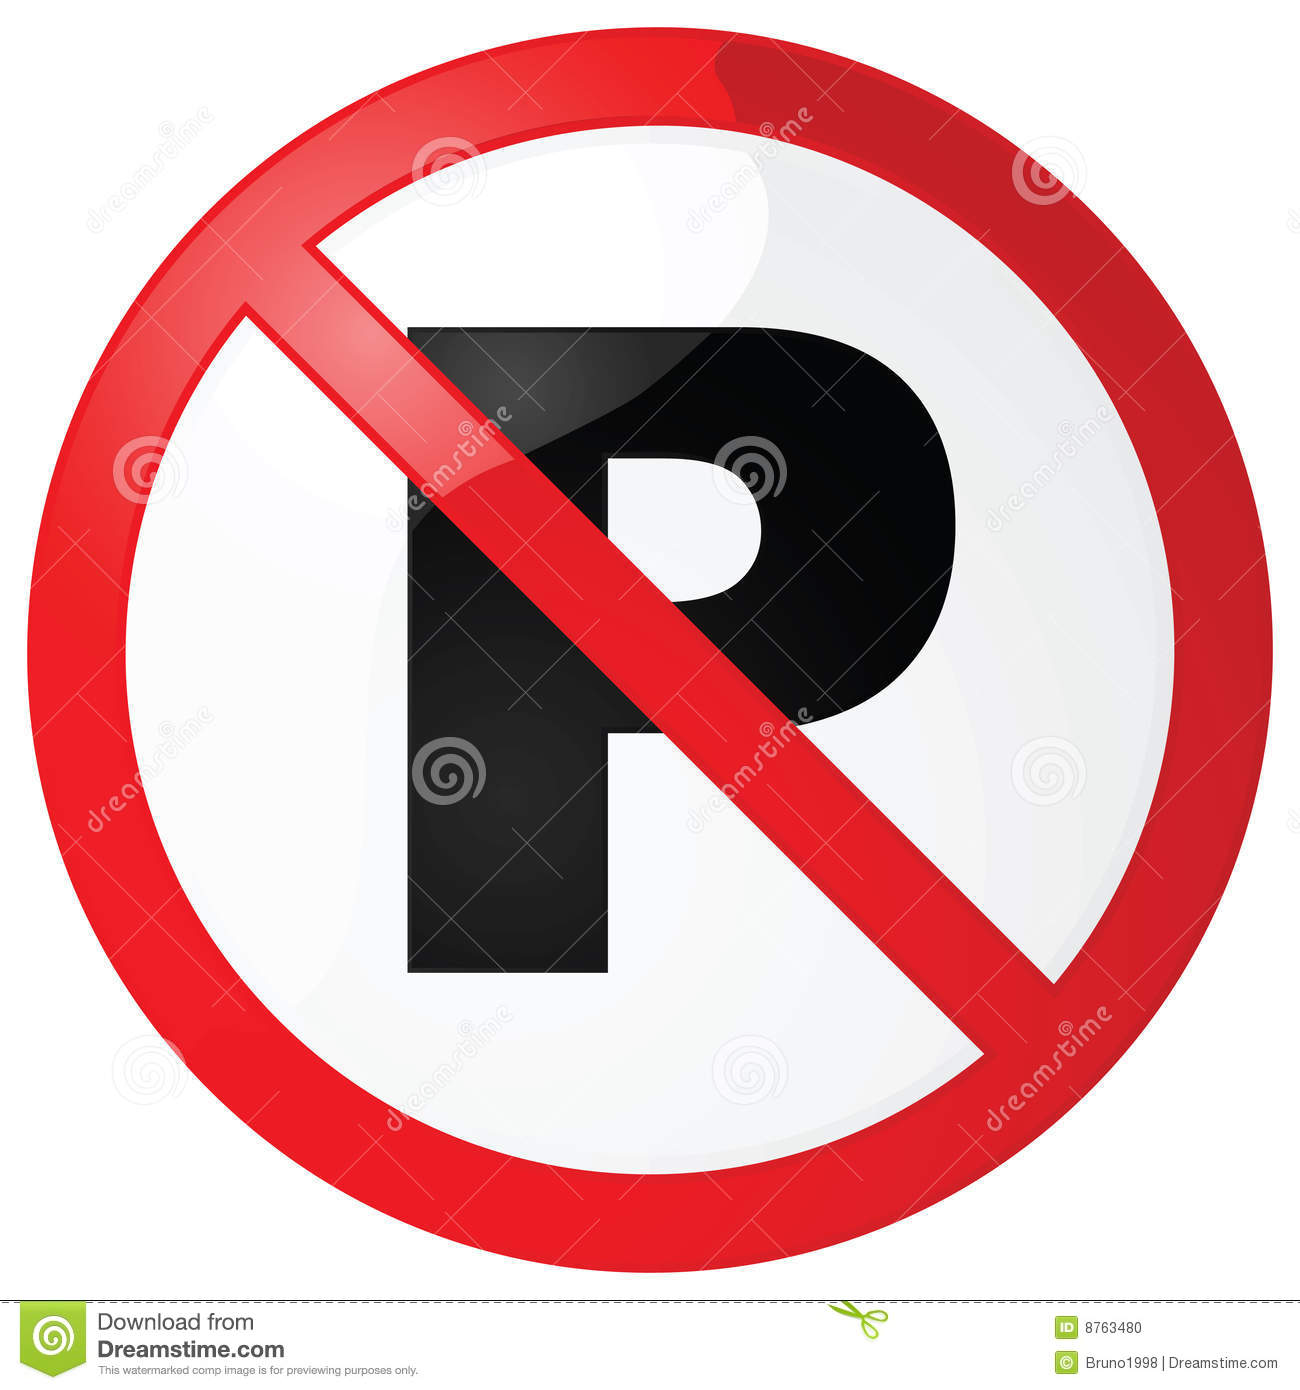 Glossy Illustration Of A Classic No Parking Sign Mr No Pr No 4 766 13